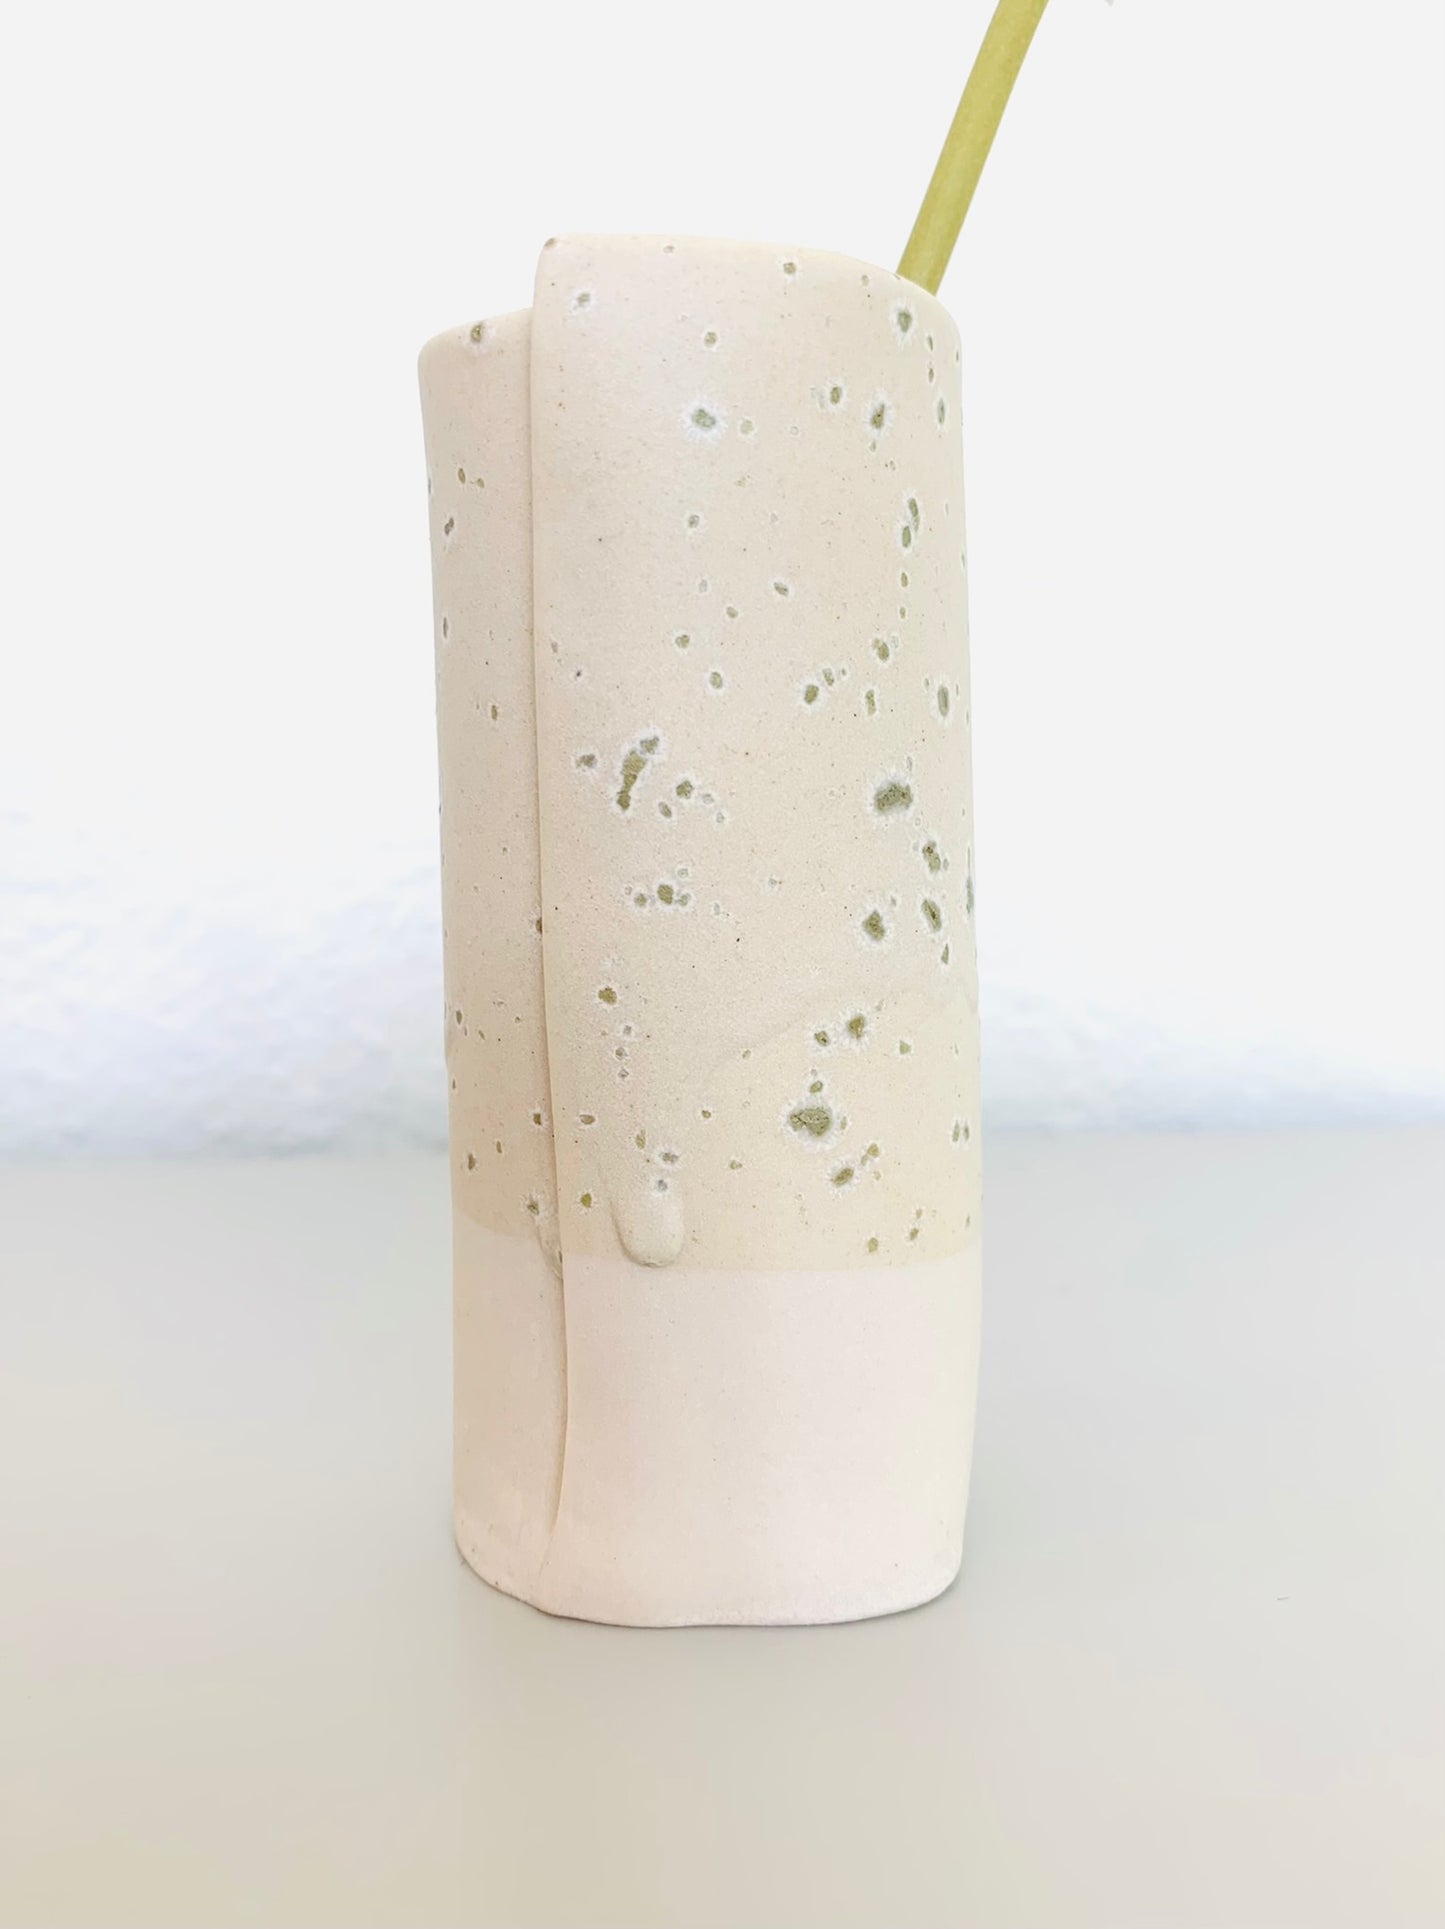 wrapped bud vase - speckled sea glass